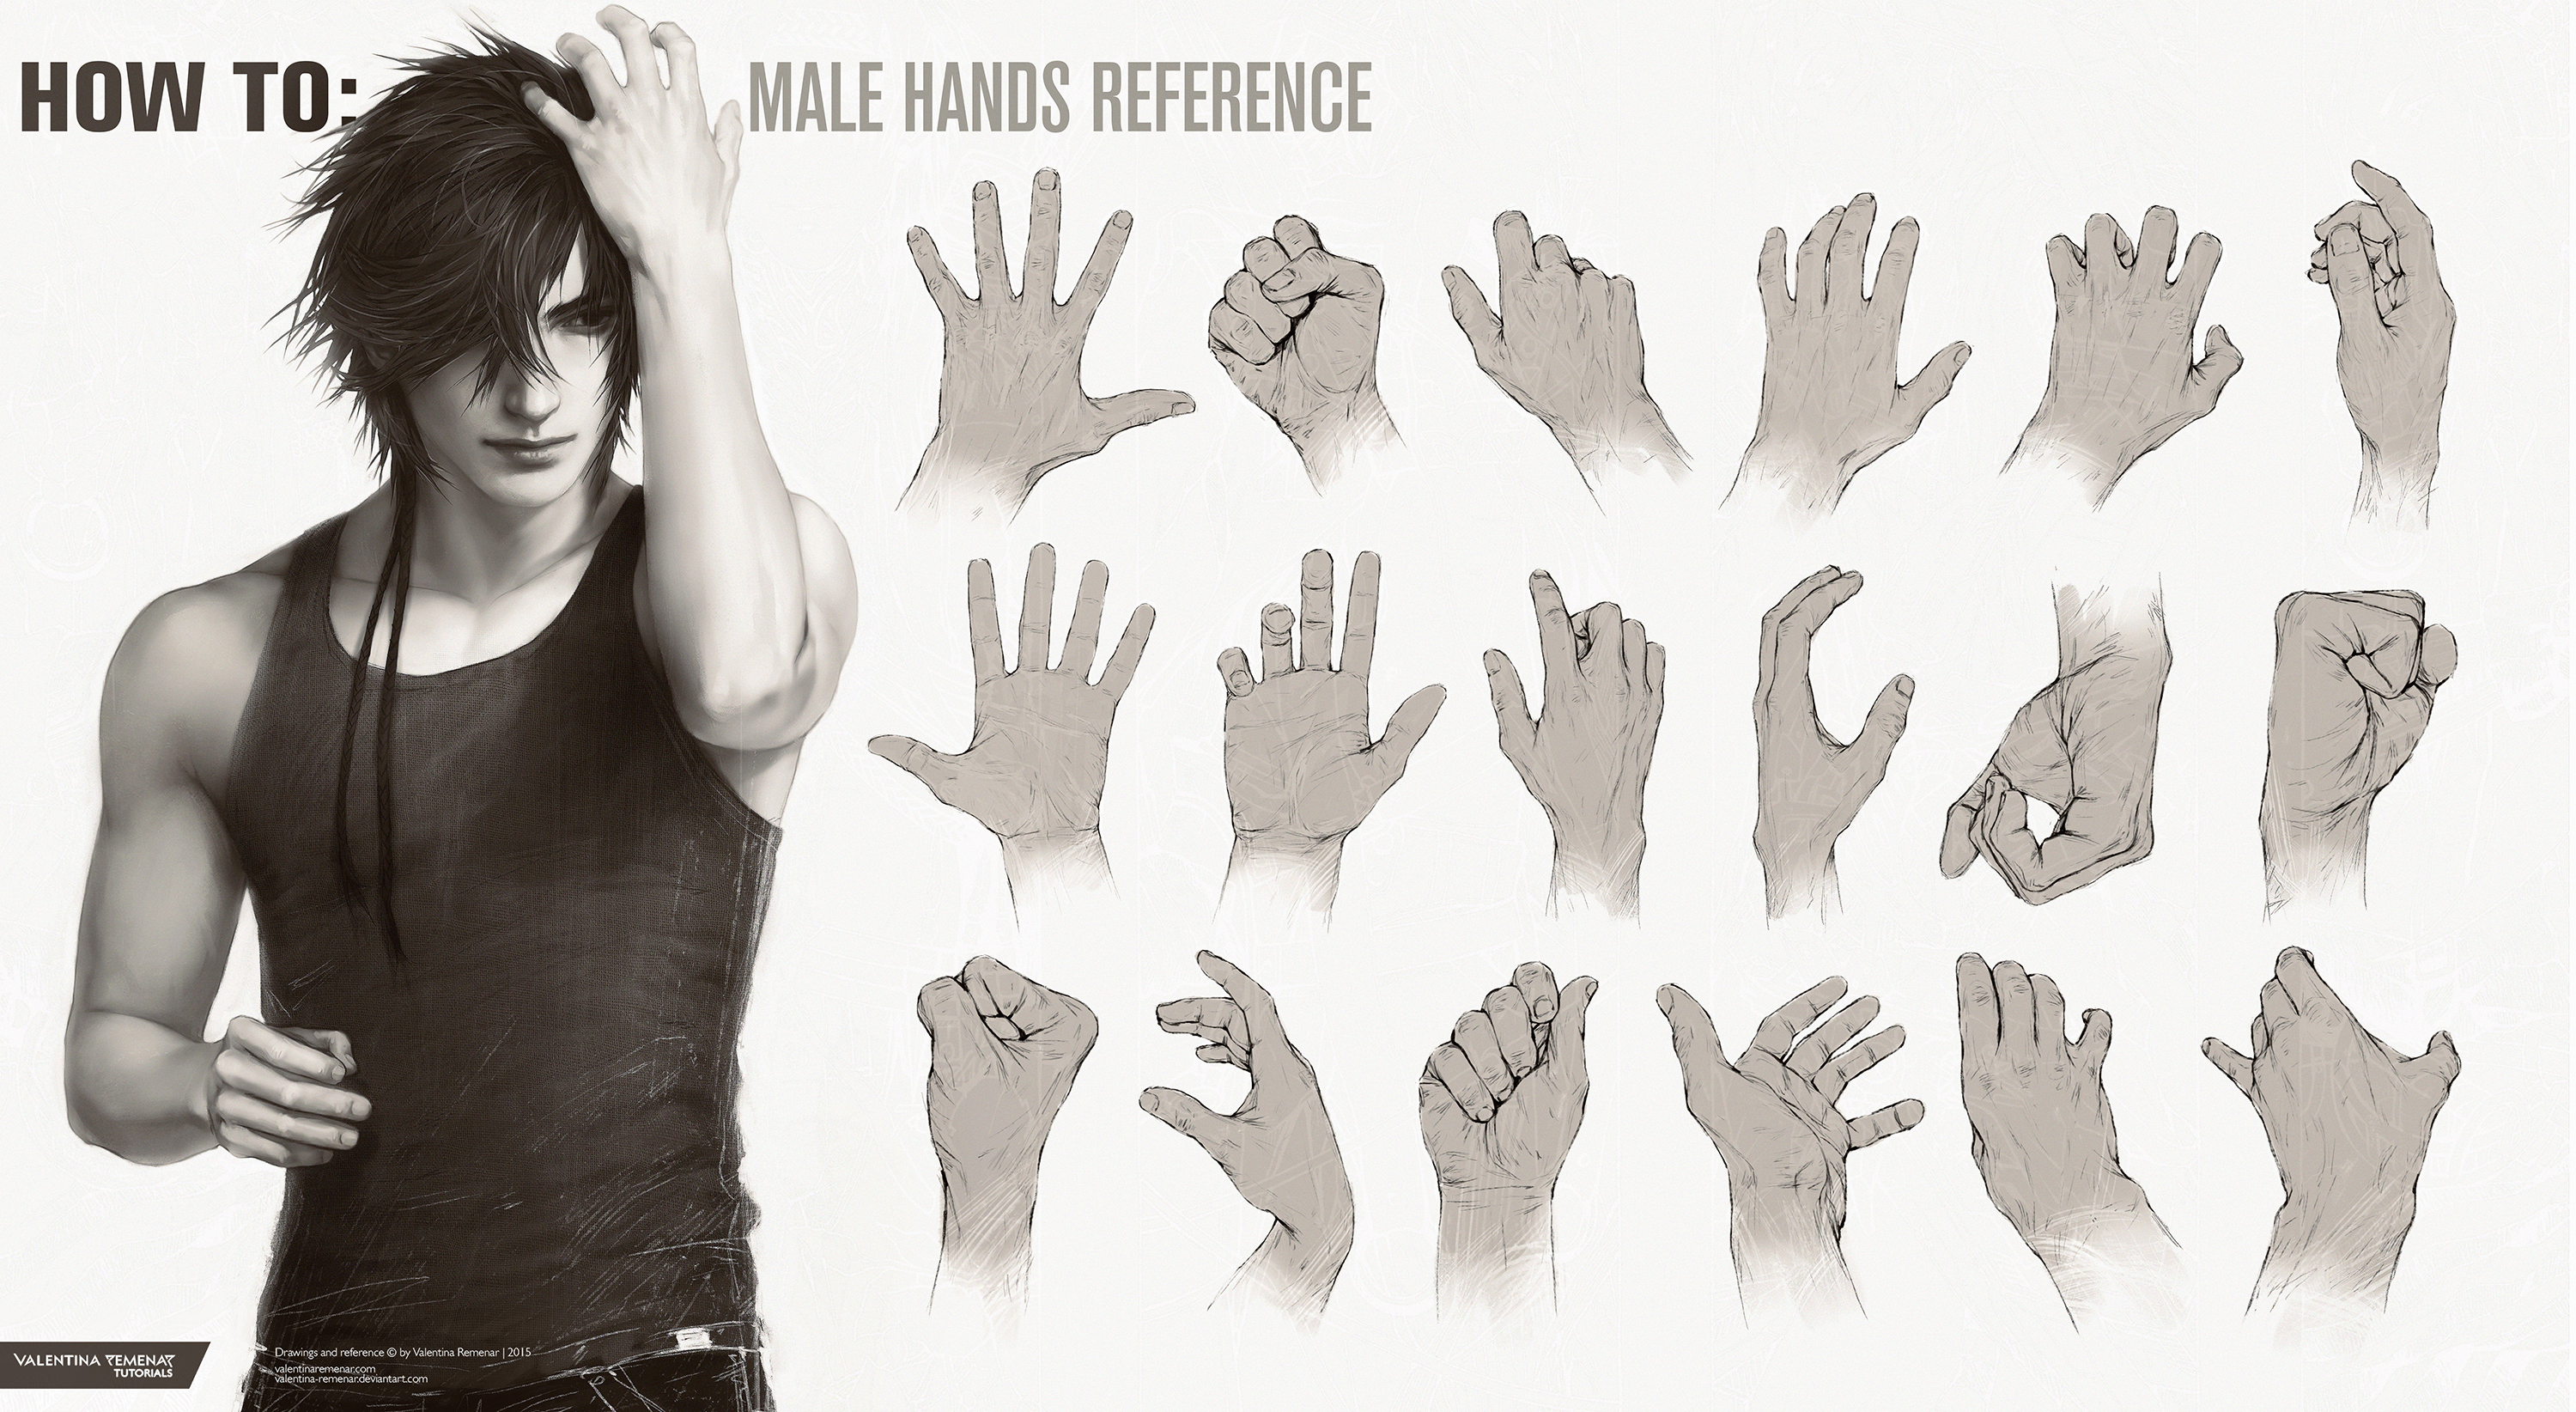 HOW TO: Male Hands Reference